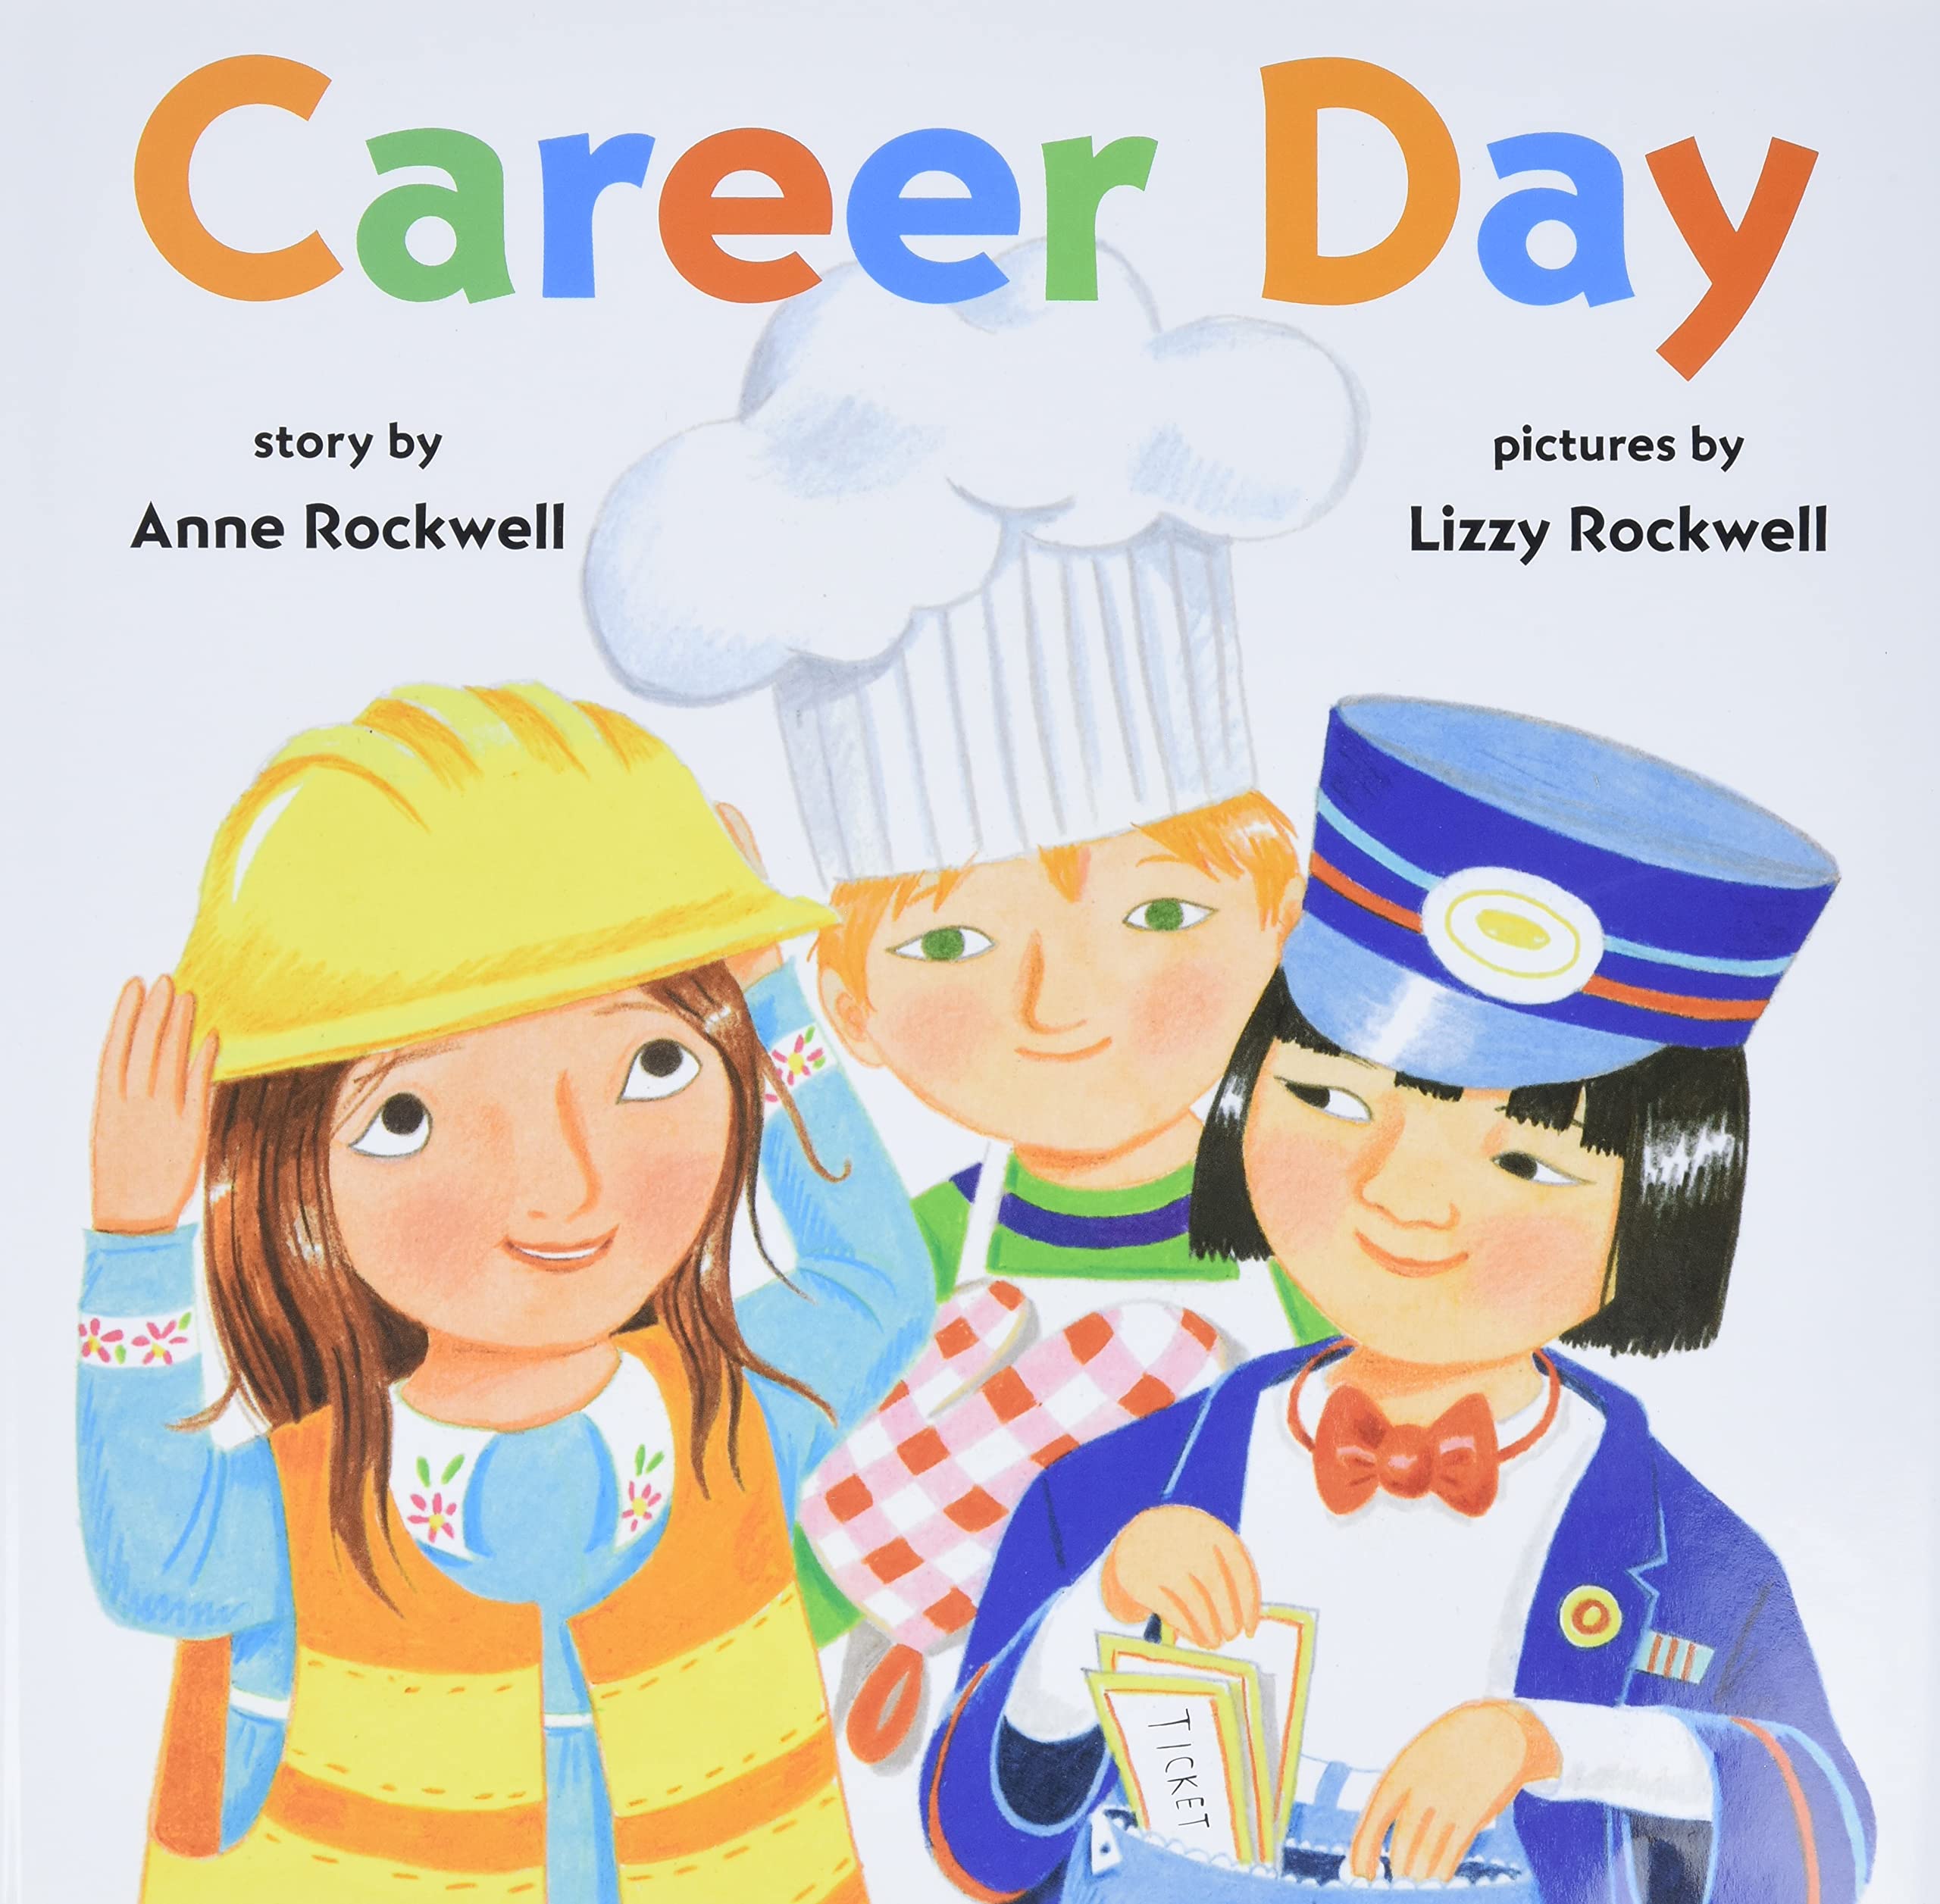 speech and language teaching concepts for Career Day in speech therapy​ ​